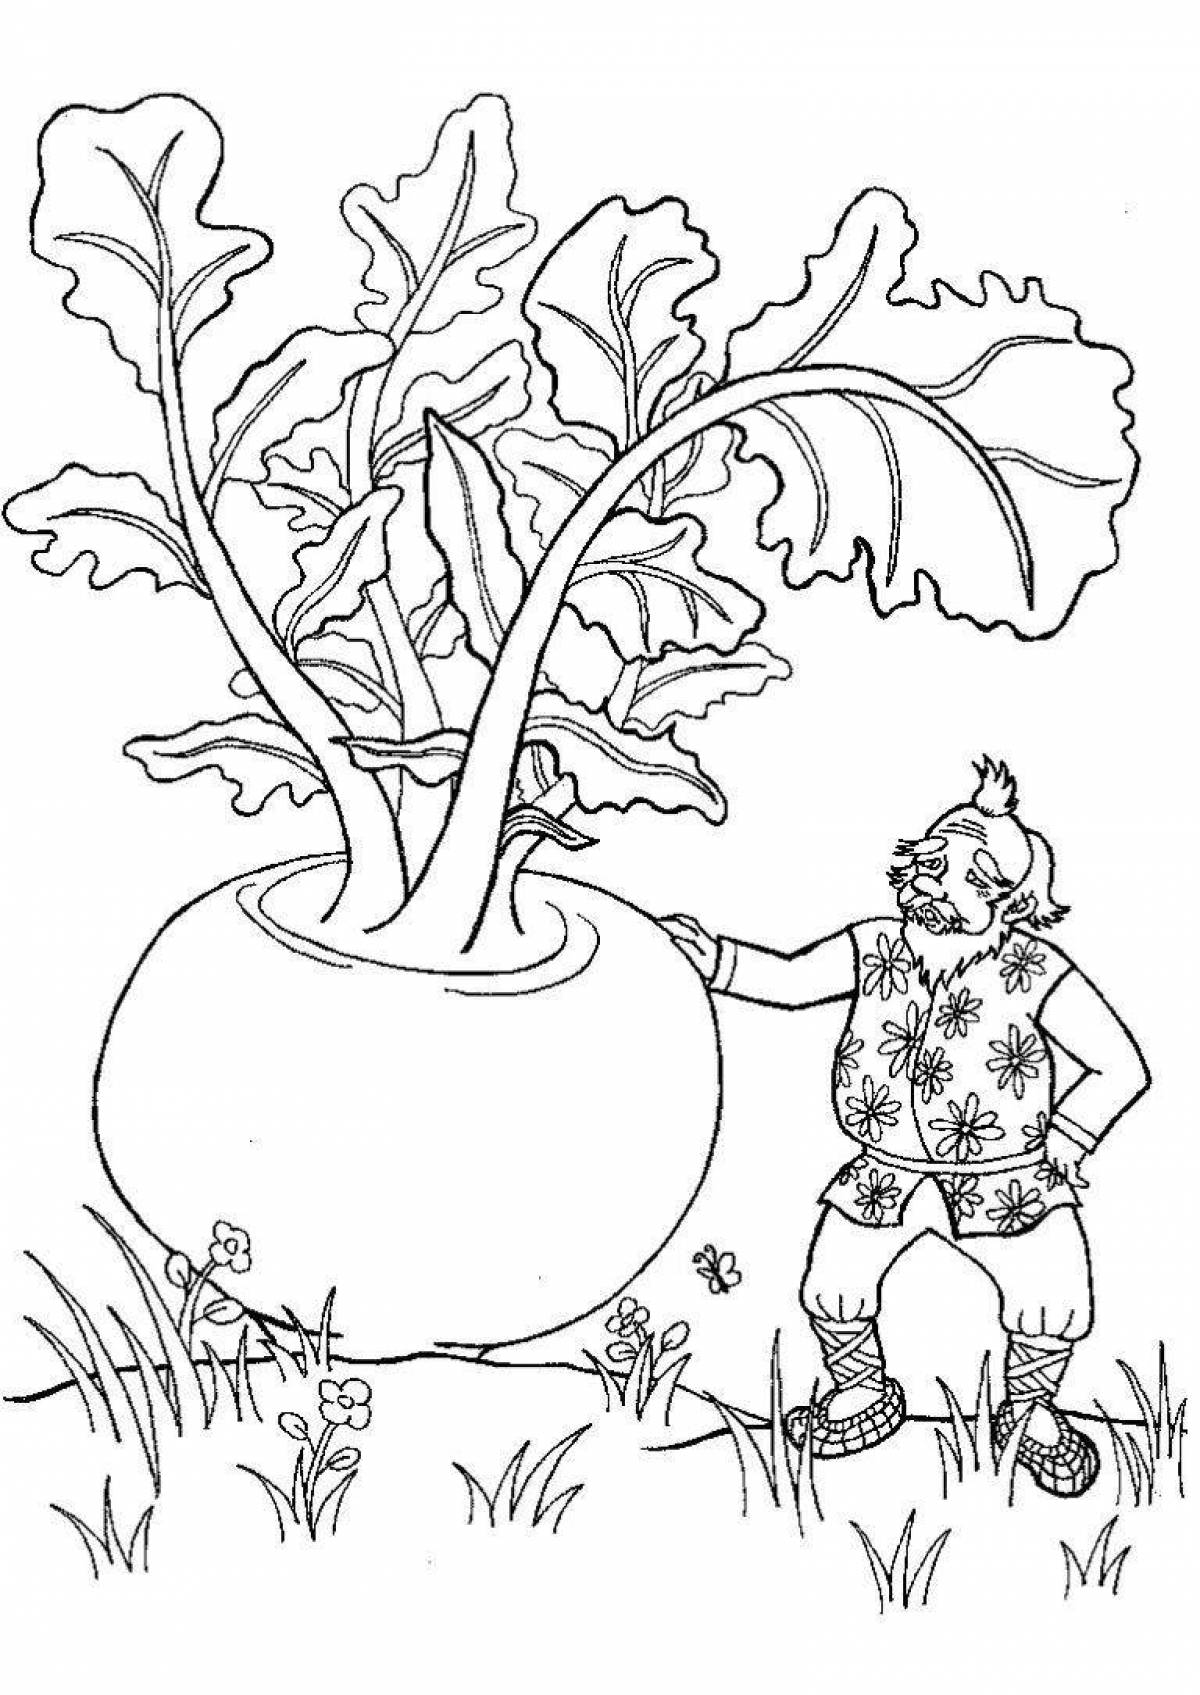 Sunny turnip coloring page for juniors